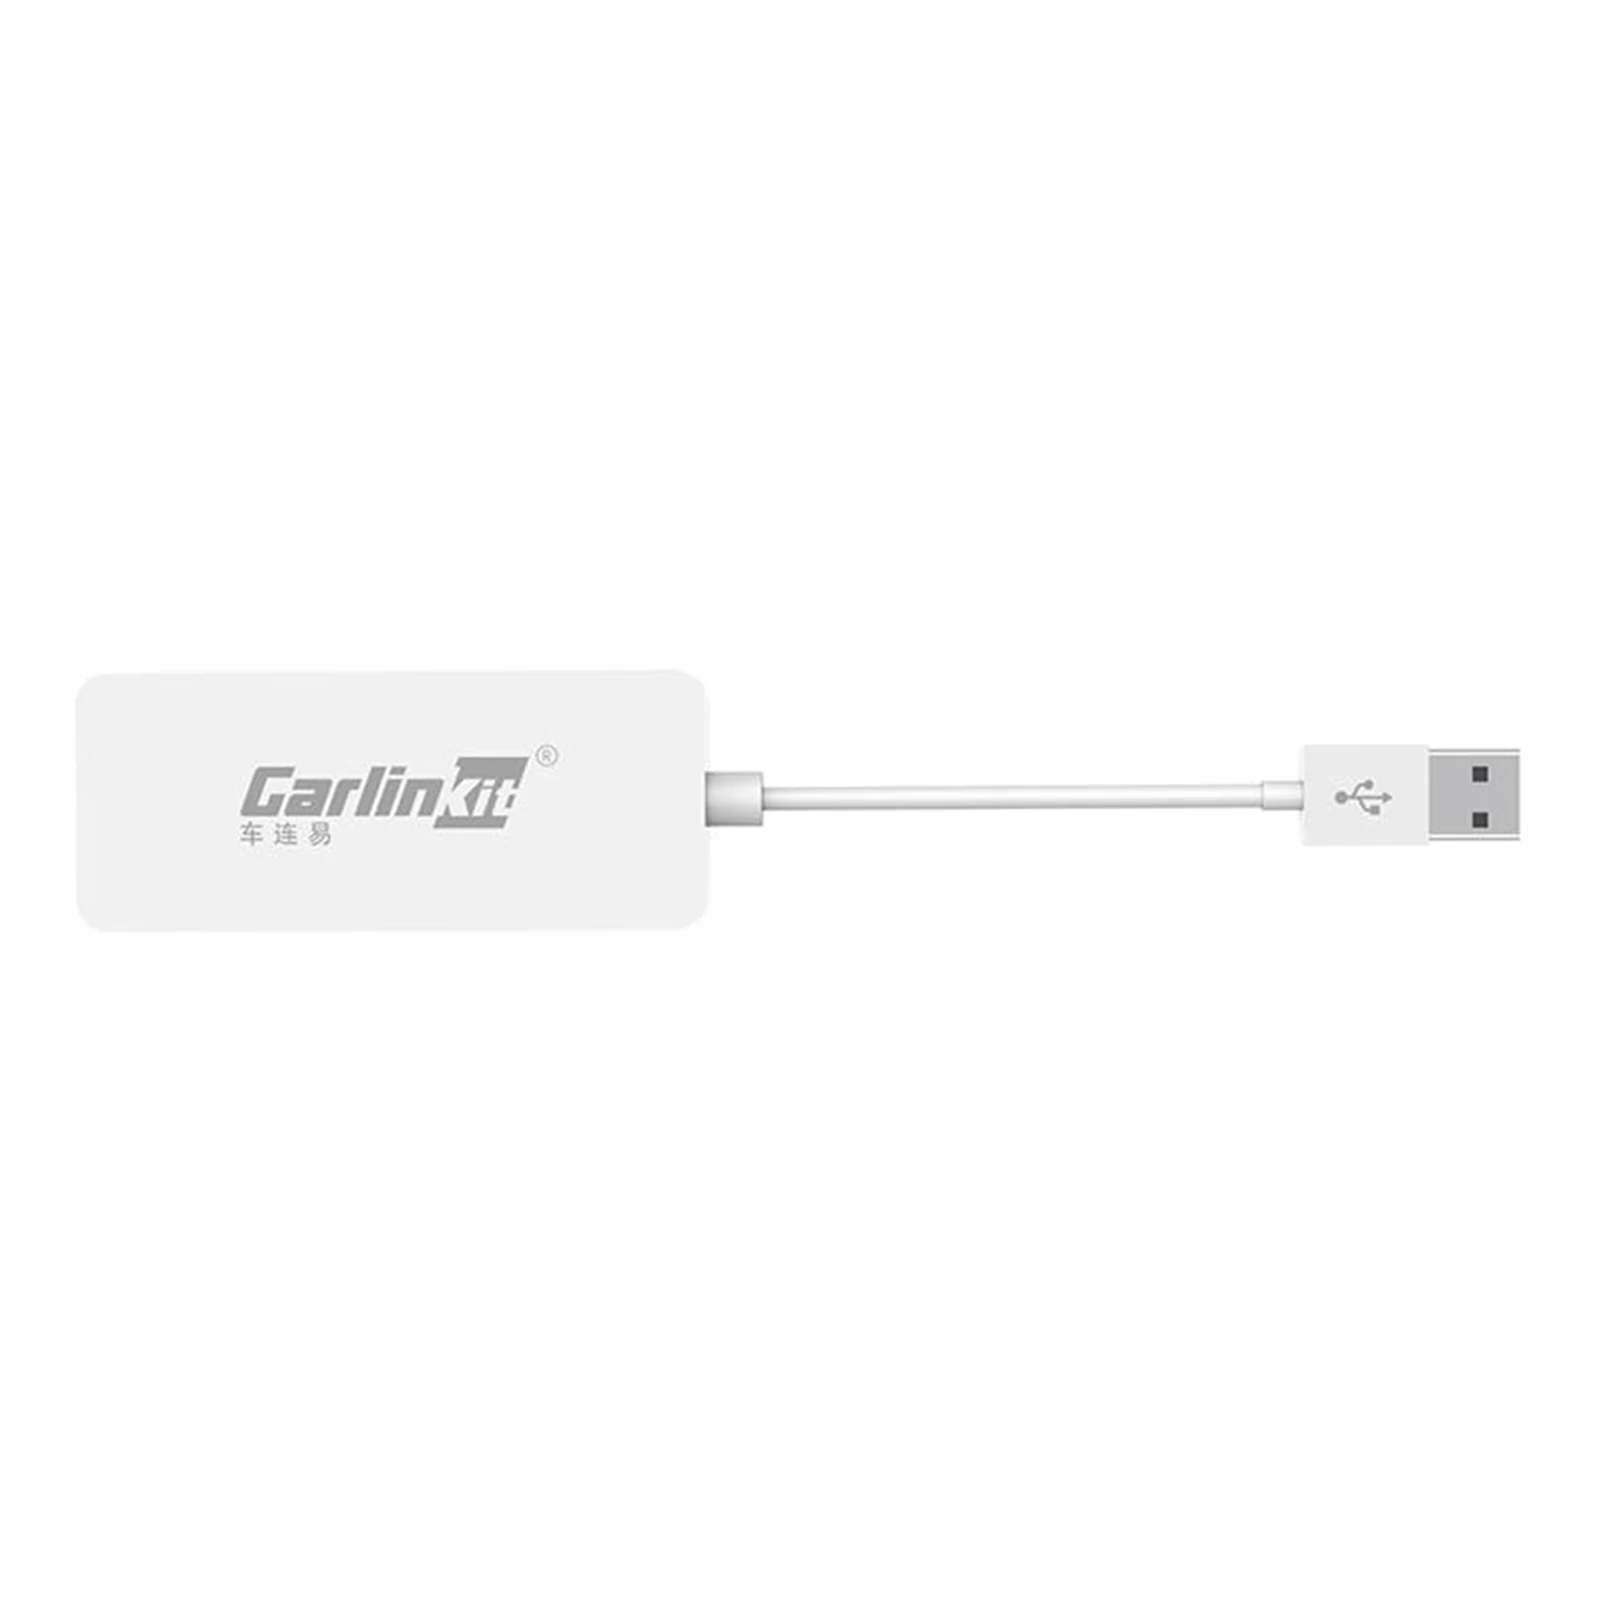 Carlinkit Car Auto Hands Free Smart Link Dongle Adapter for iPhone